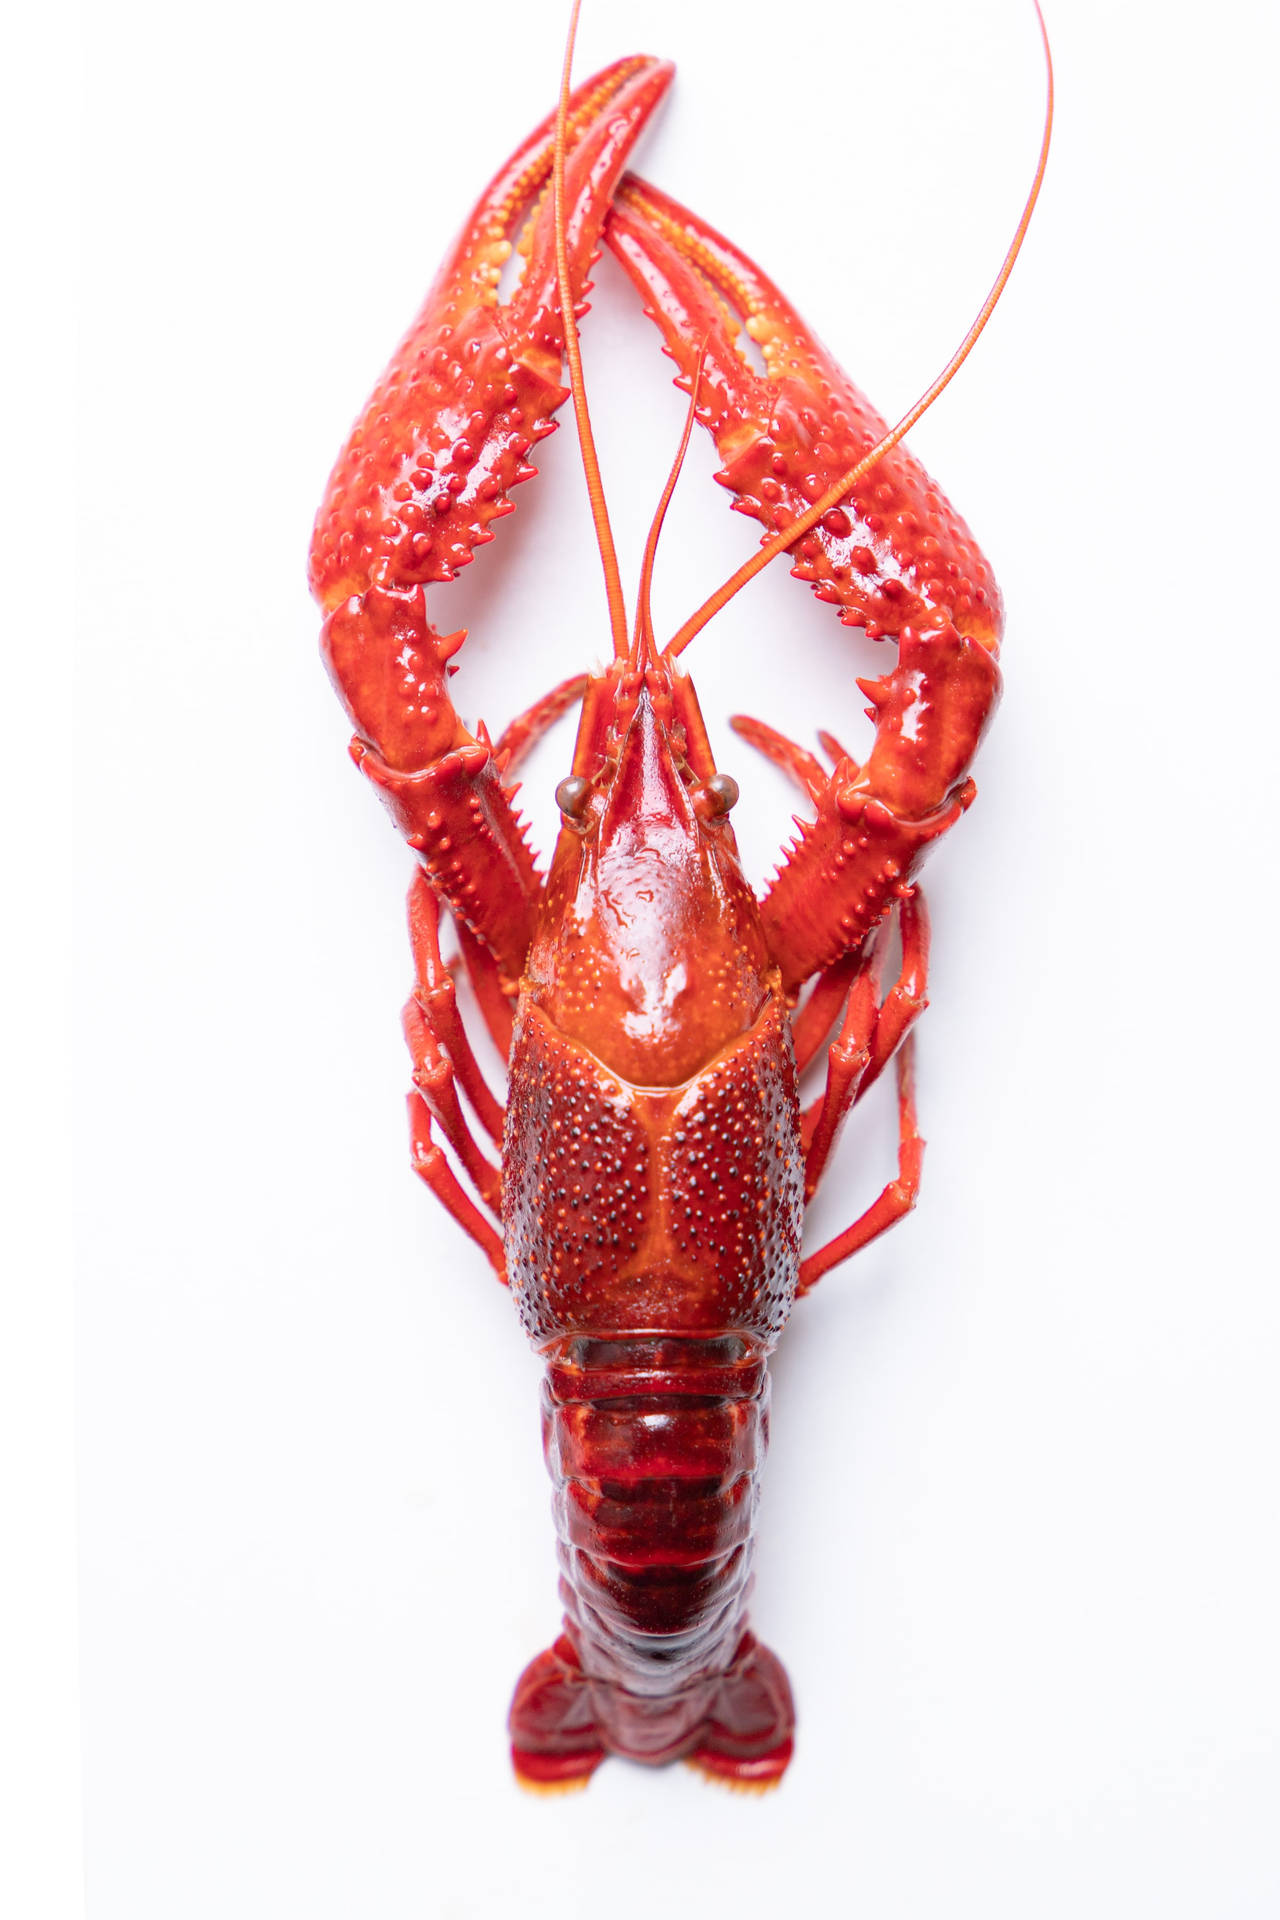 Red Crayfish Sea Lobster In White Wallpaper